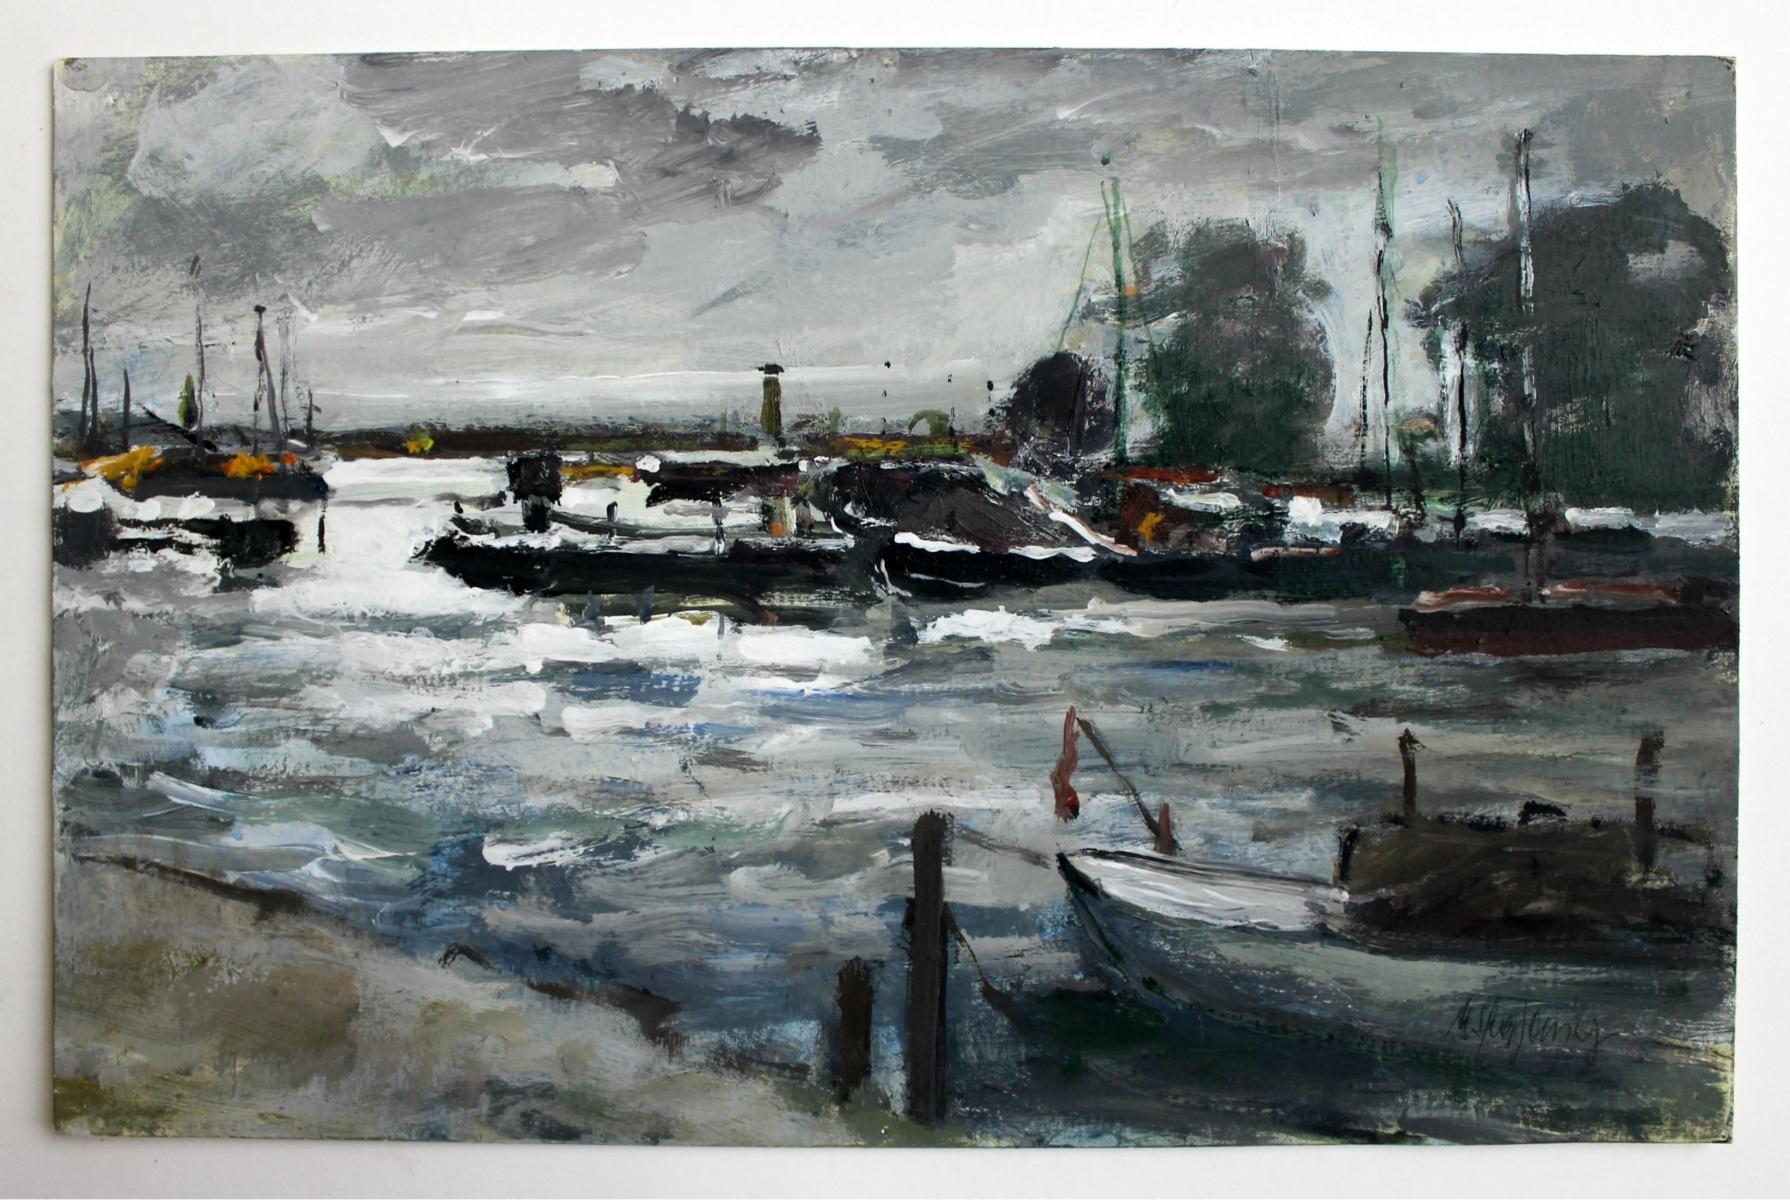 Boats - Oil painting, Figurative, Landscape, Muted colors, Impressionism - Painting by Magdalena Spasowicz